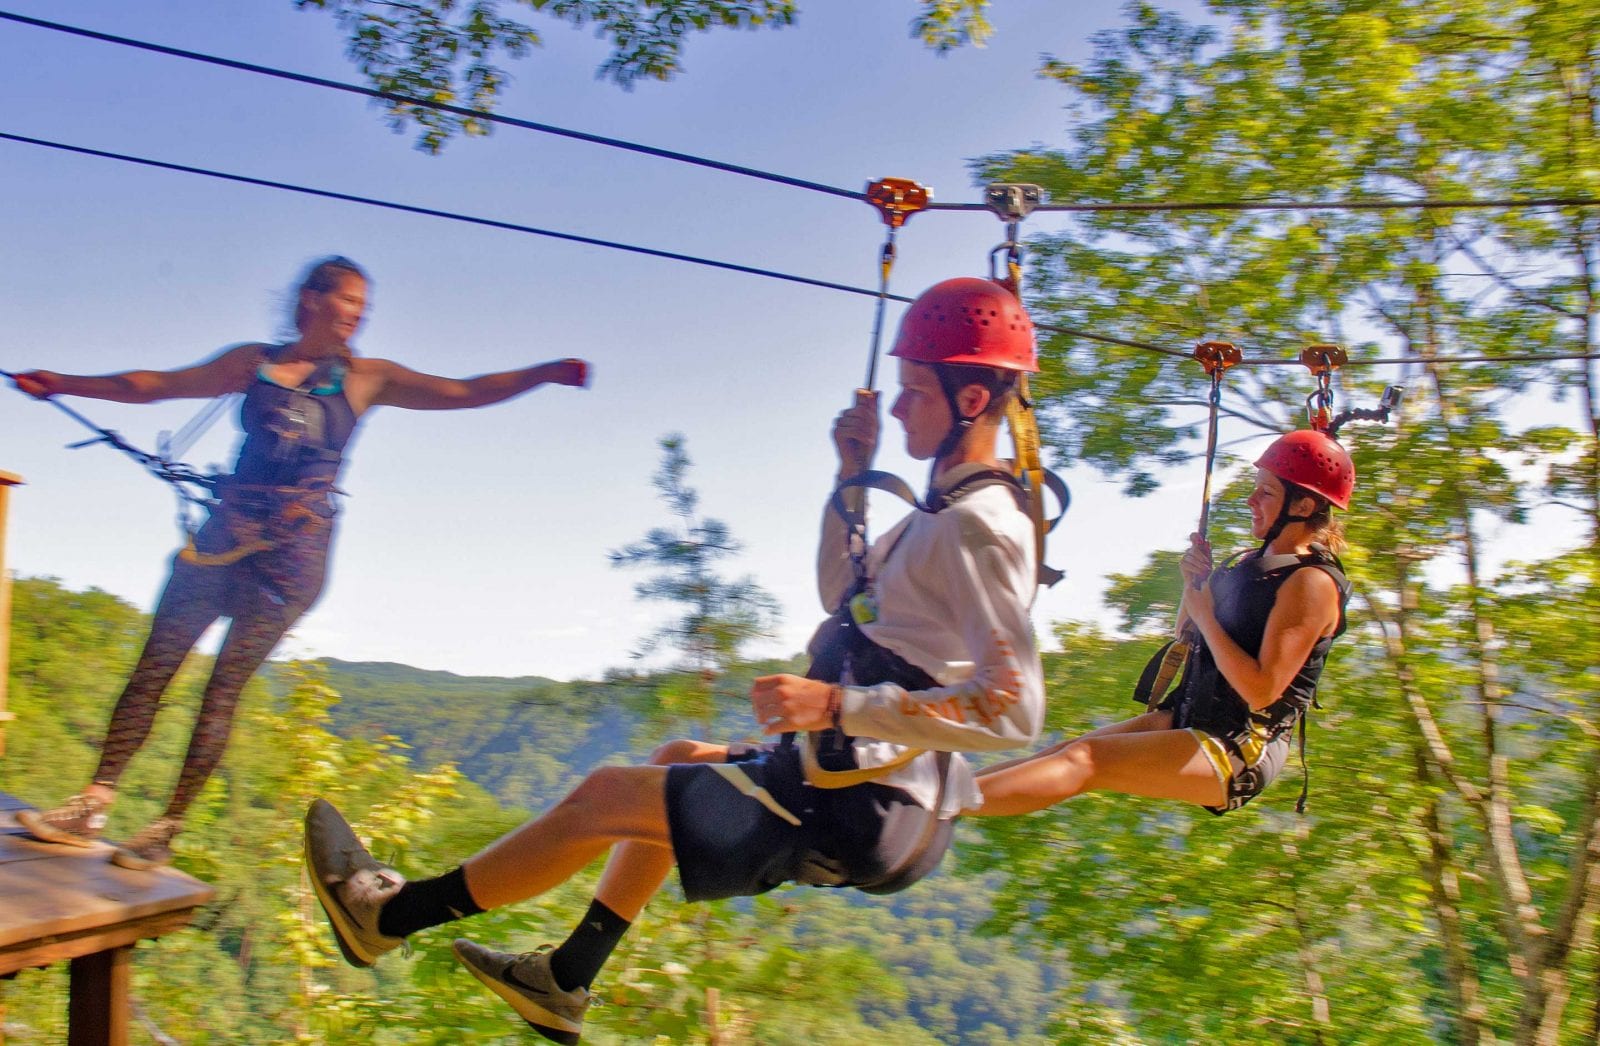 A mother and son enjoy come into a landing on ACE's New River Gorge ziplining canopy tour.